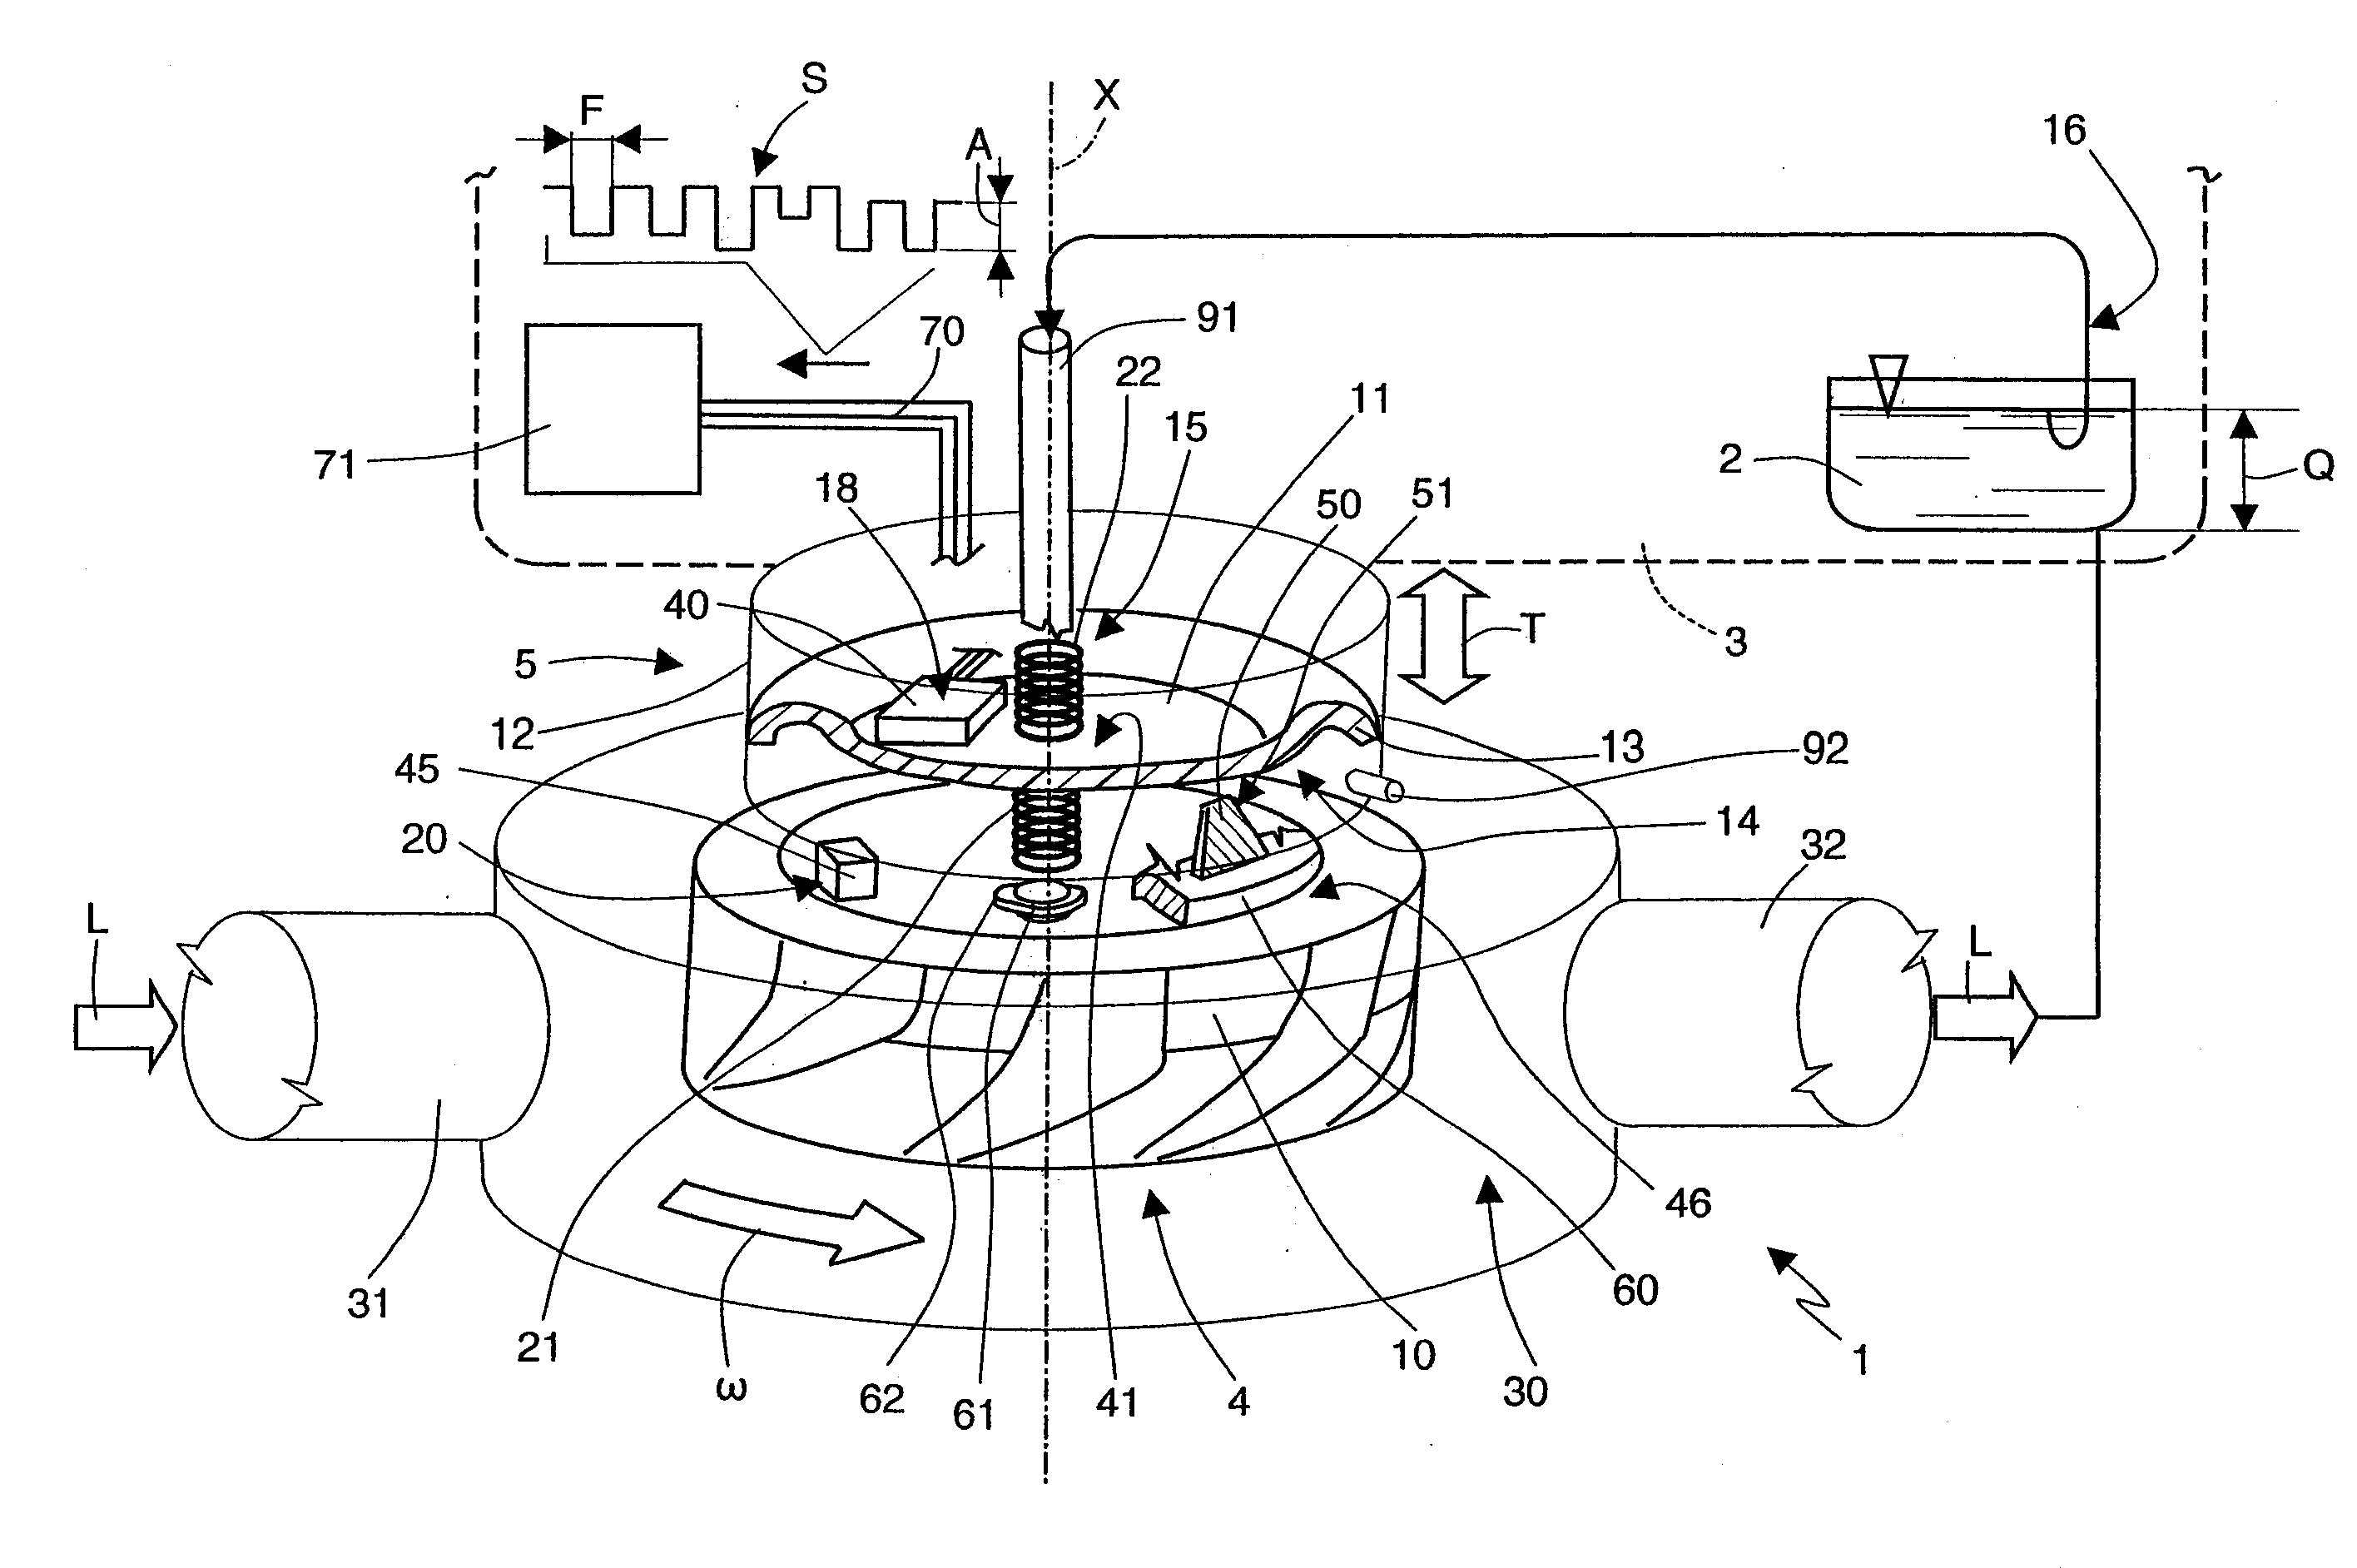 Monitoring device of the feed to an electric household appliance of an operative fluid, in particular of a flow of water to a tank of a washing machine or dishwasher